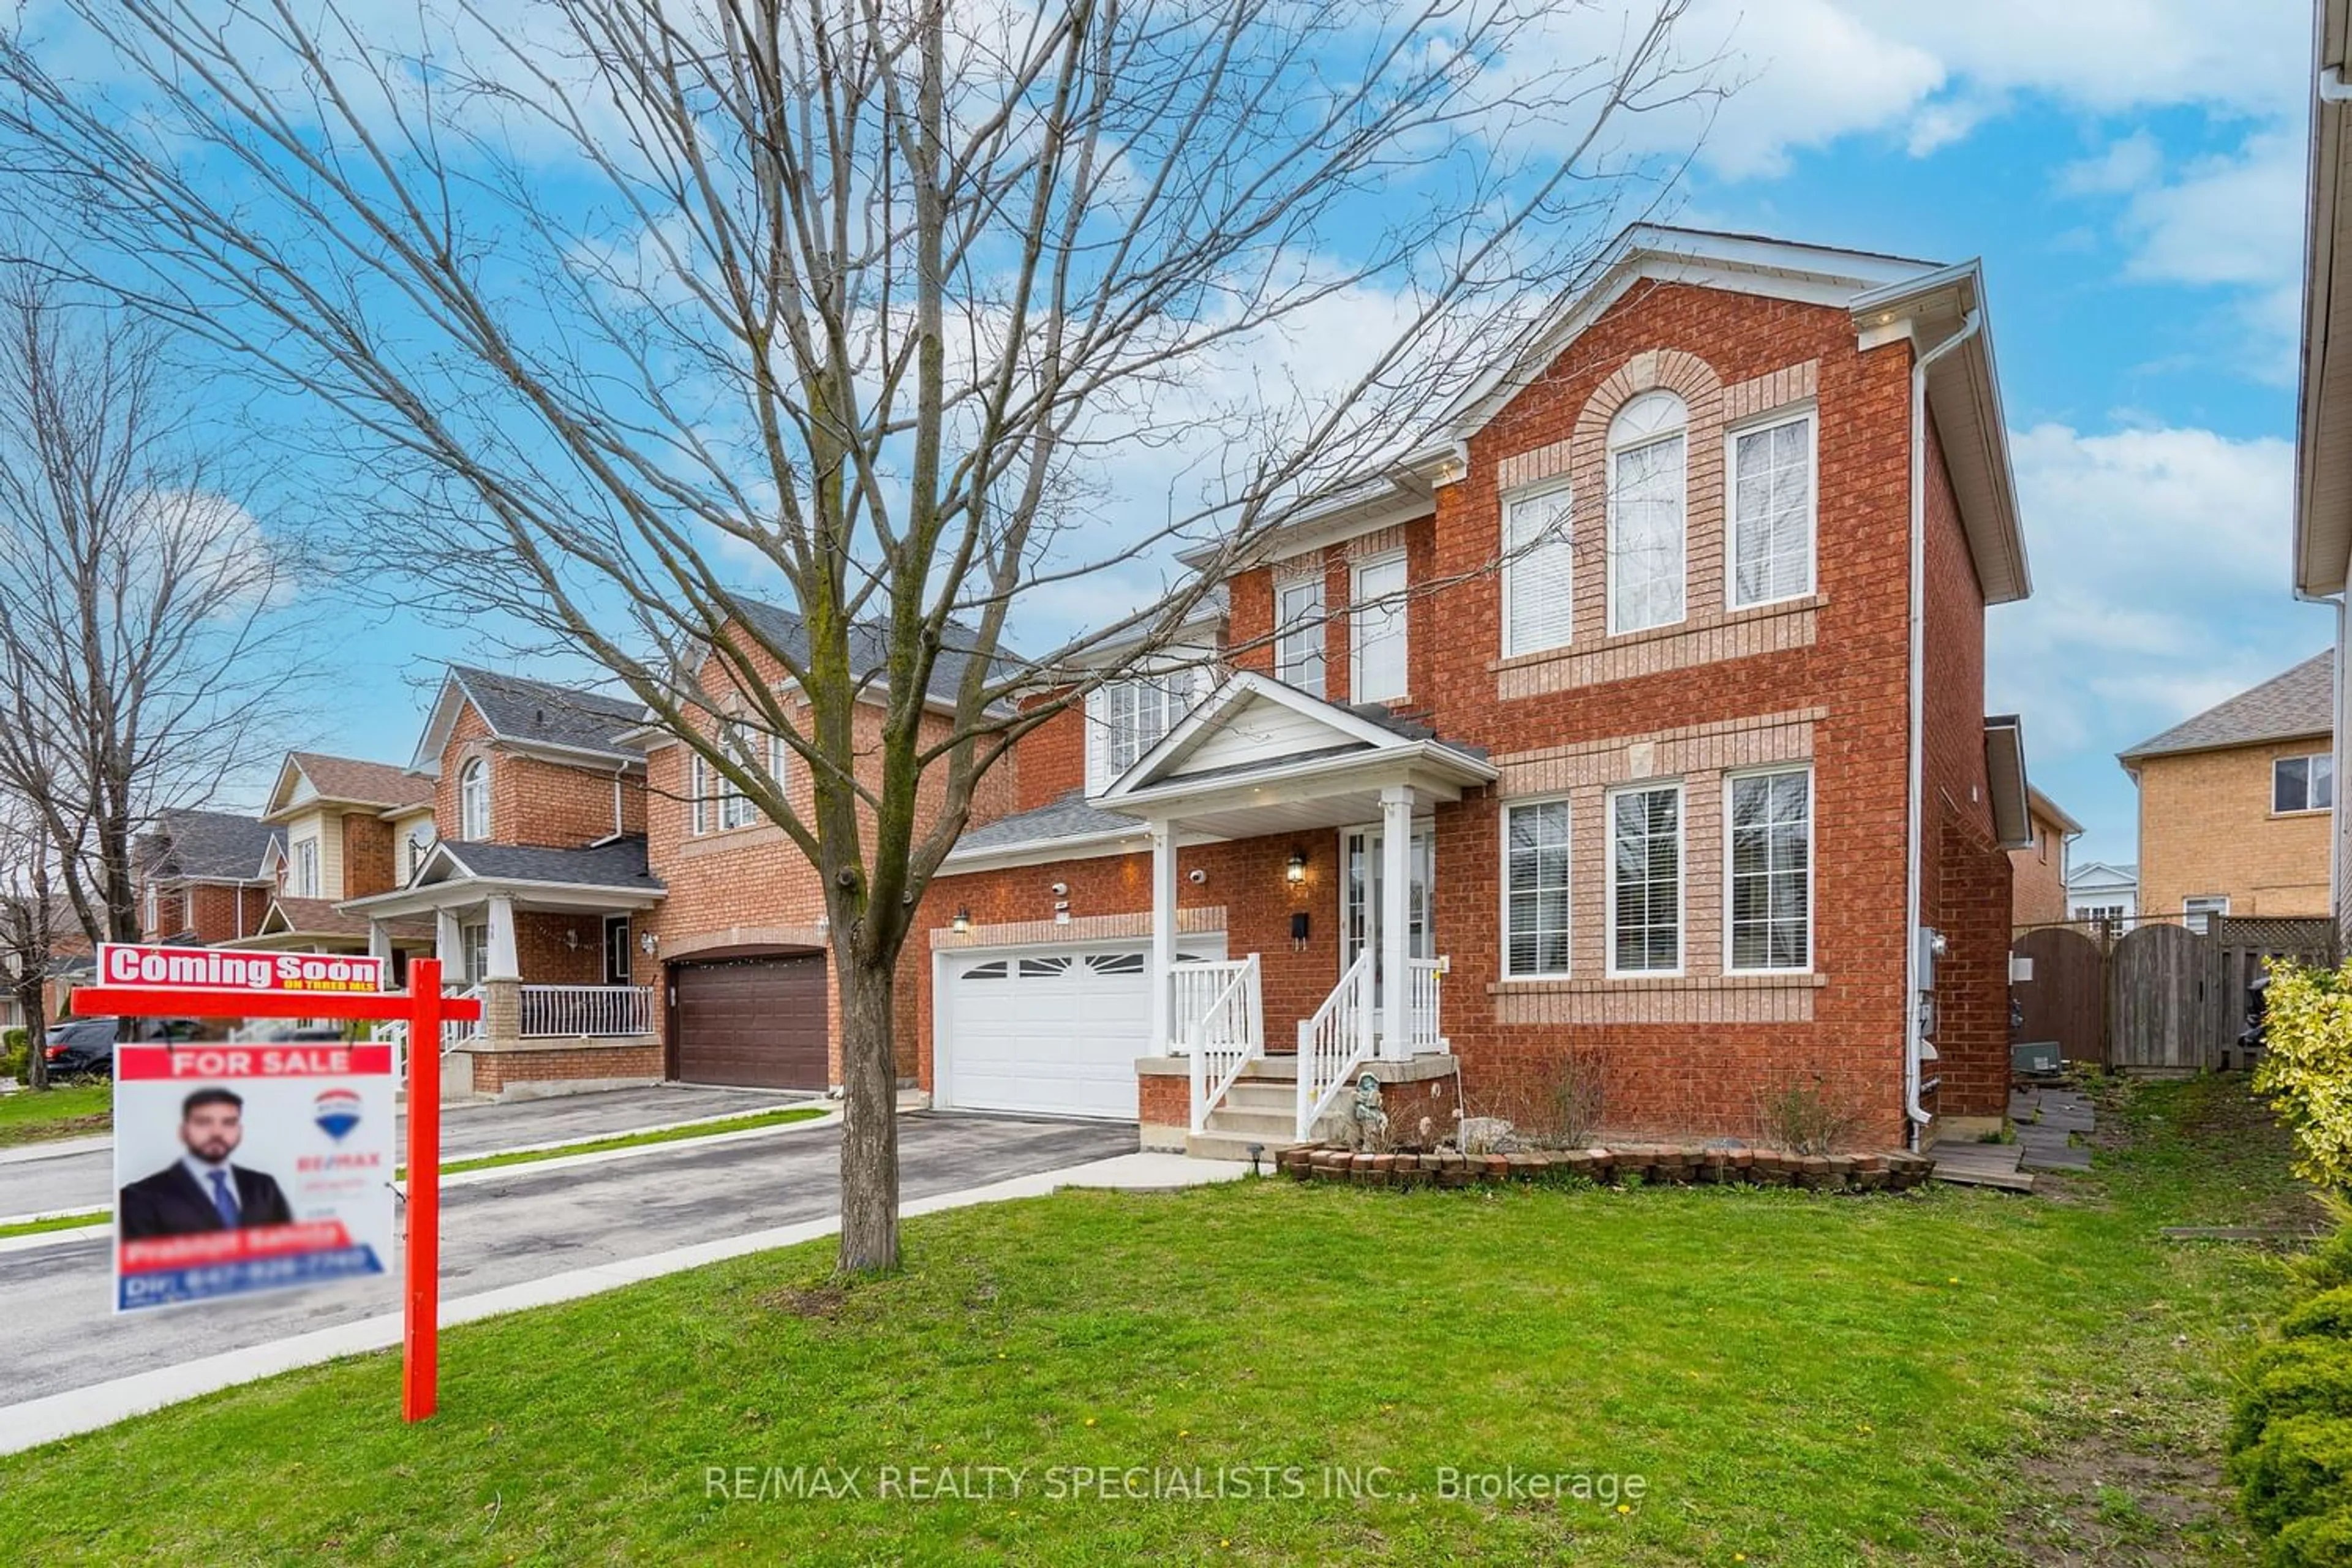 Home with brick exterior material for 27 Great Plains St, Brampton Ontario L6R 1Z5